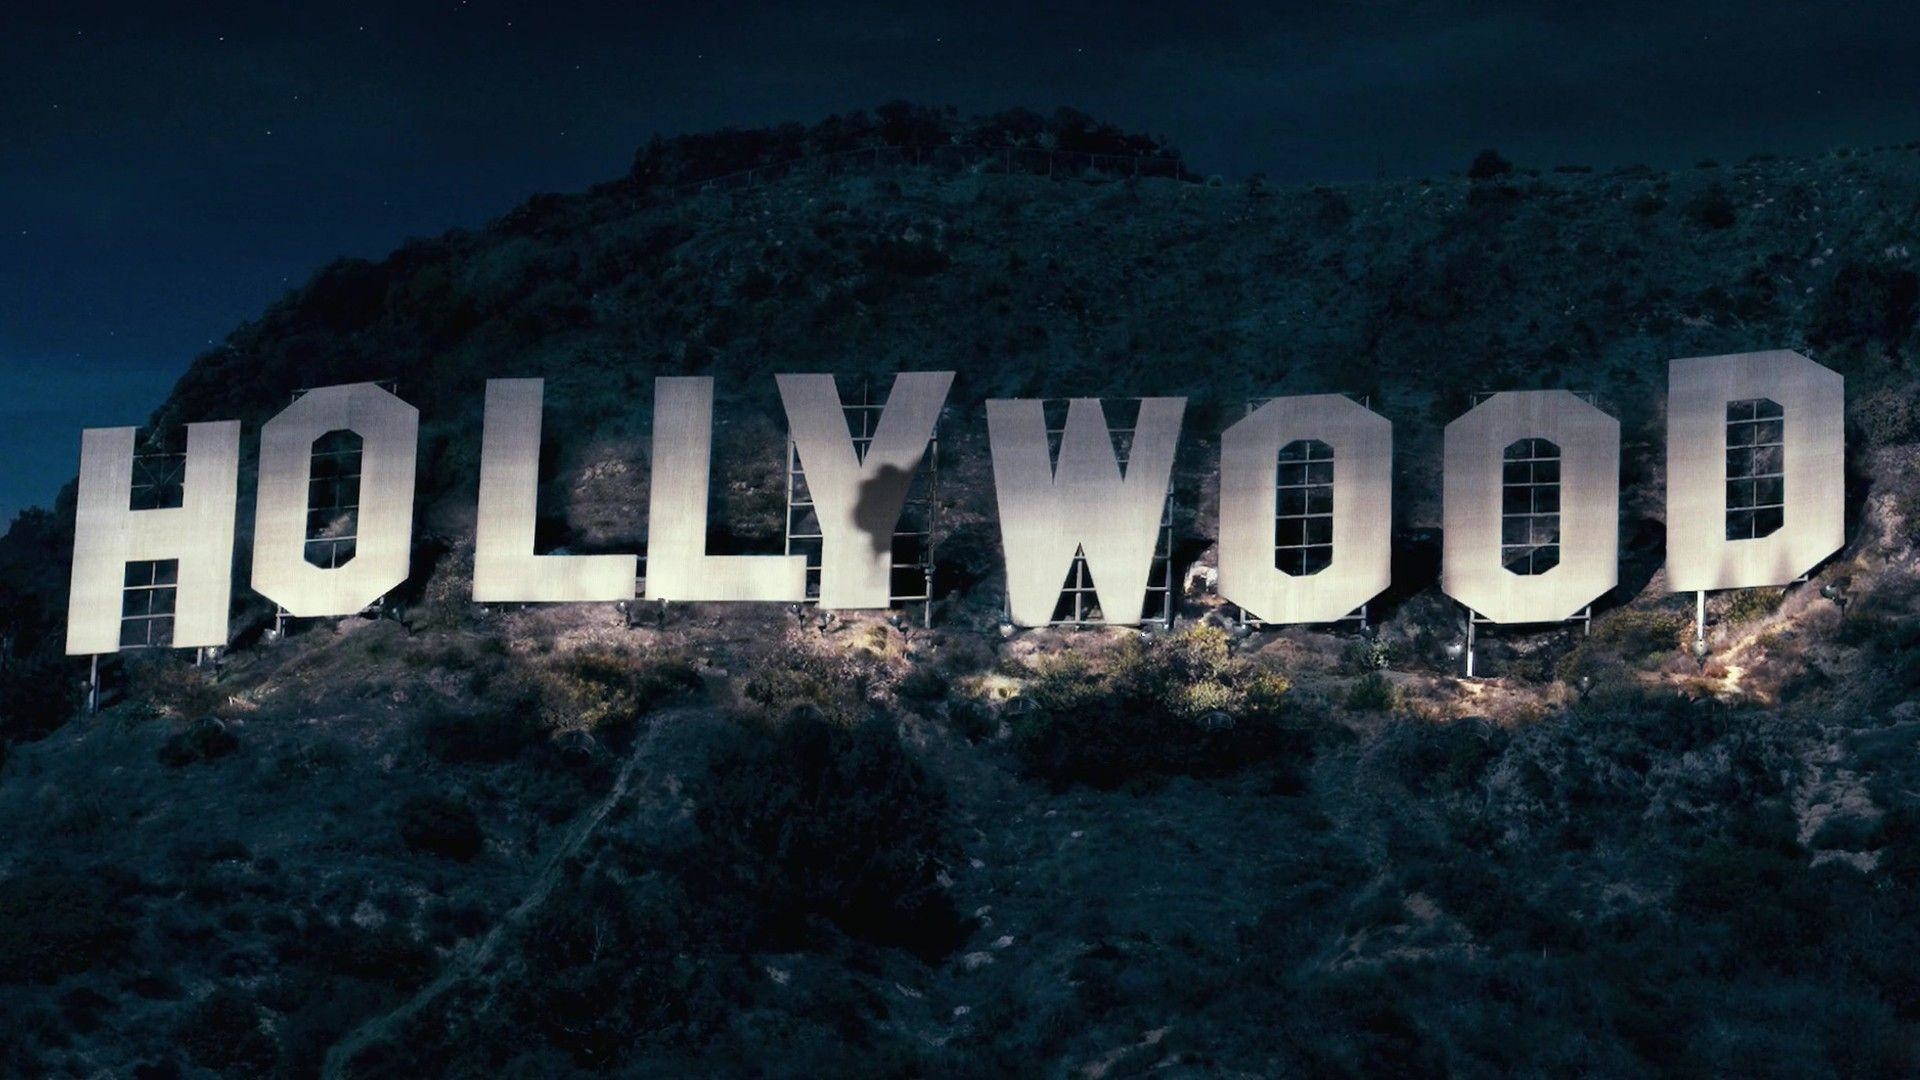 1920x1080 Hollywood sign Wallpaper | High Quality Wallpaper